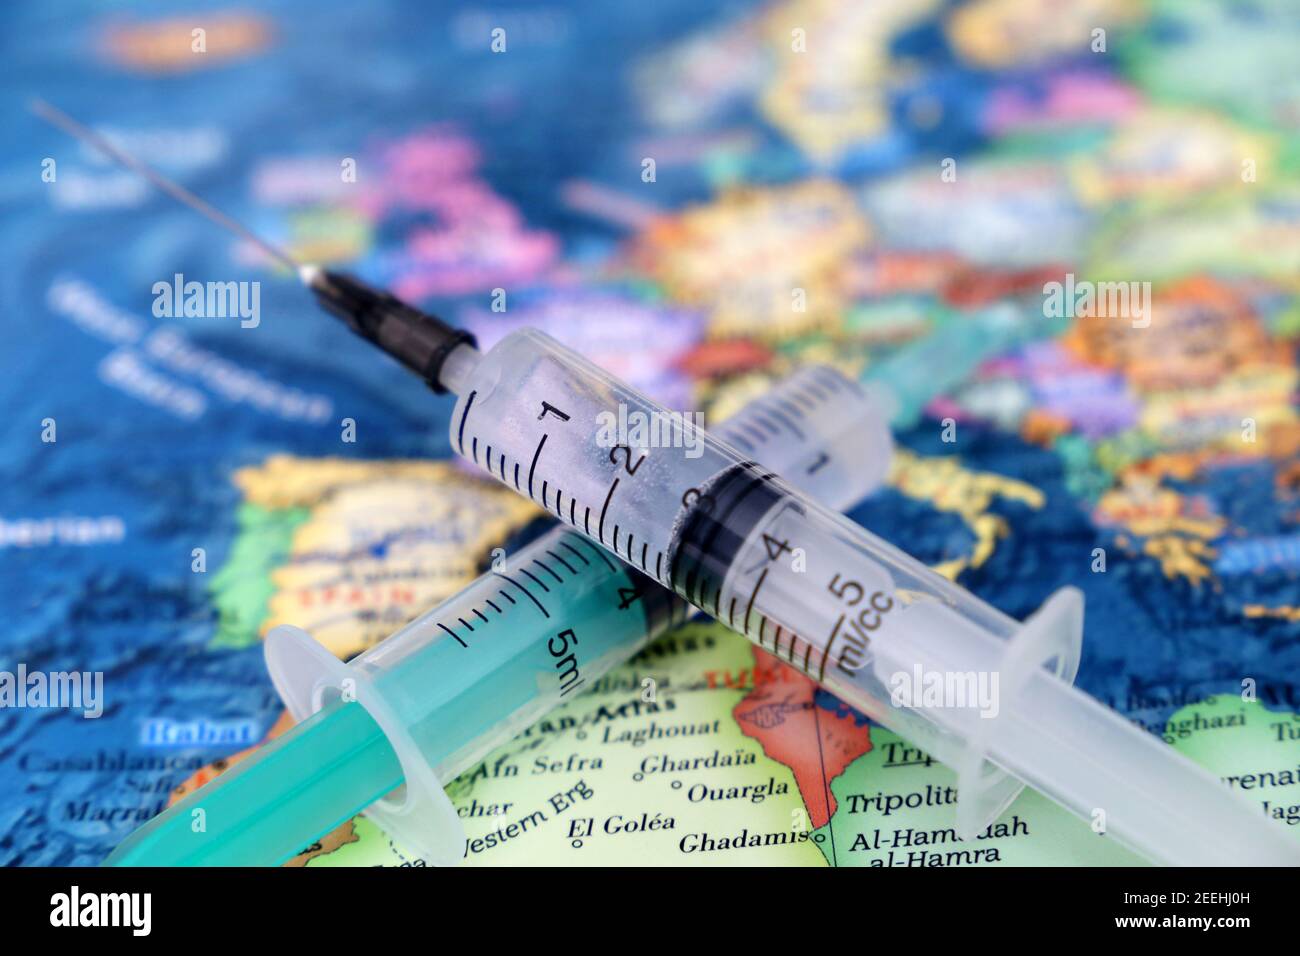 Syringes on the map of Europe and North Africa, selective focus. Concept of vaccination in EU countries during covid-19 pandemic Stock Photo